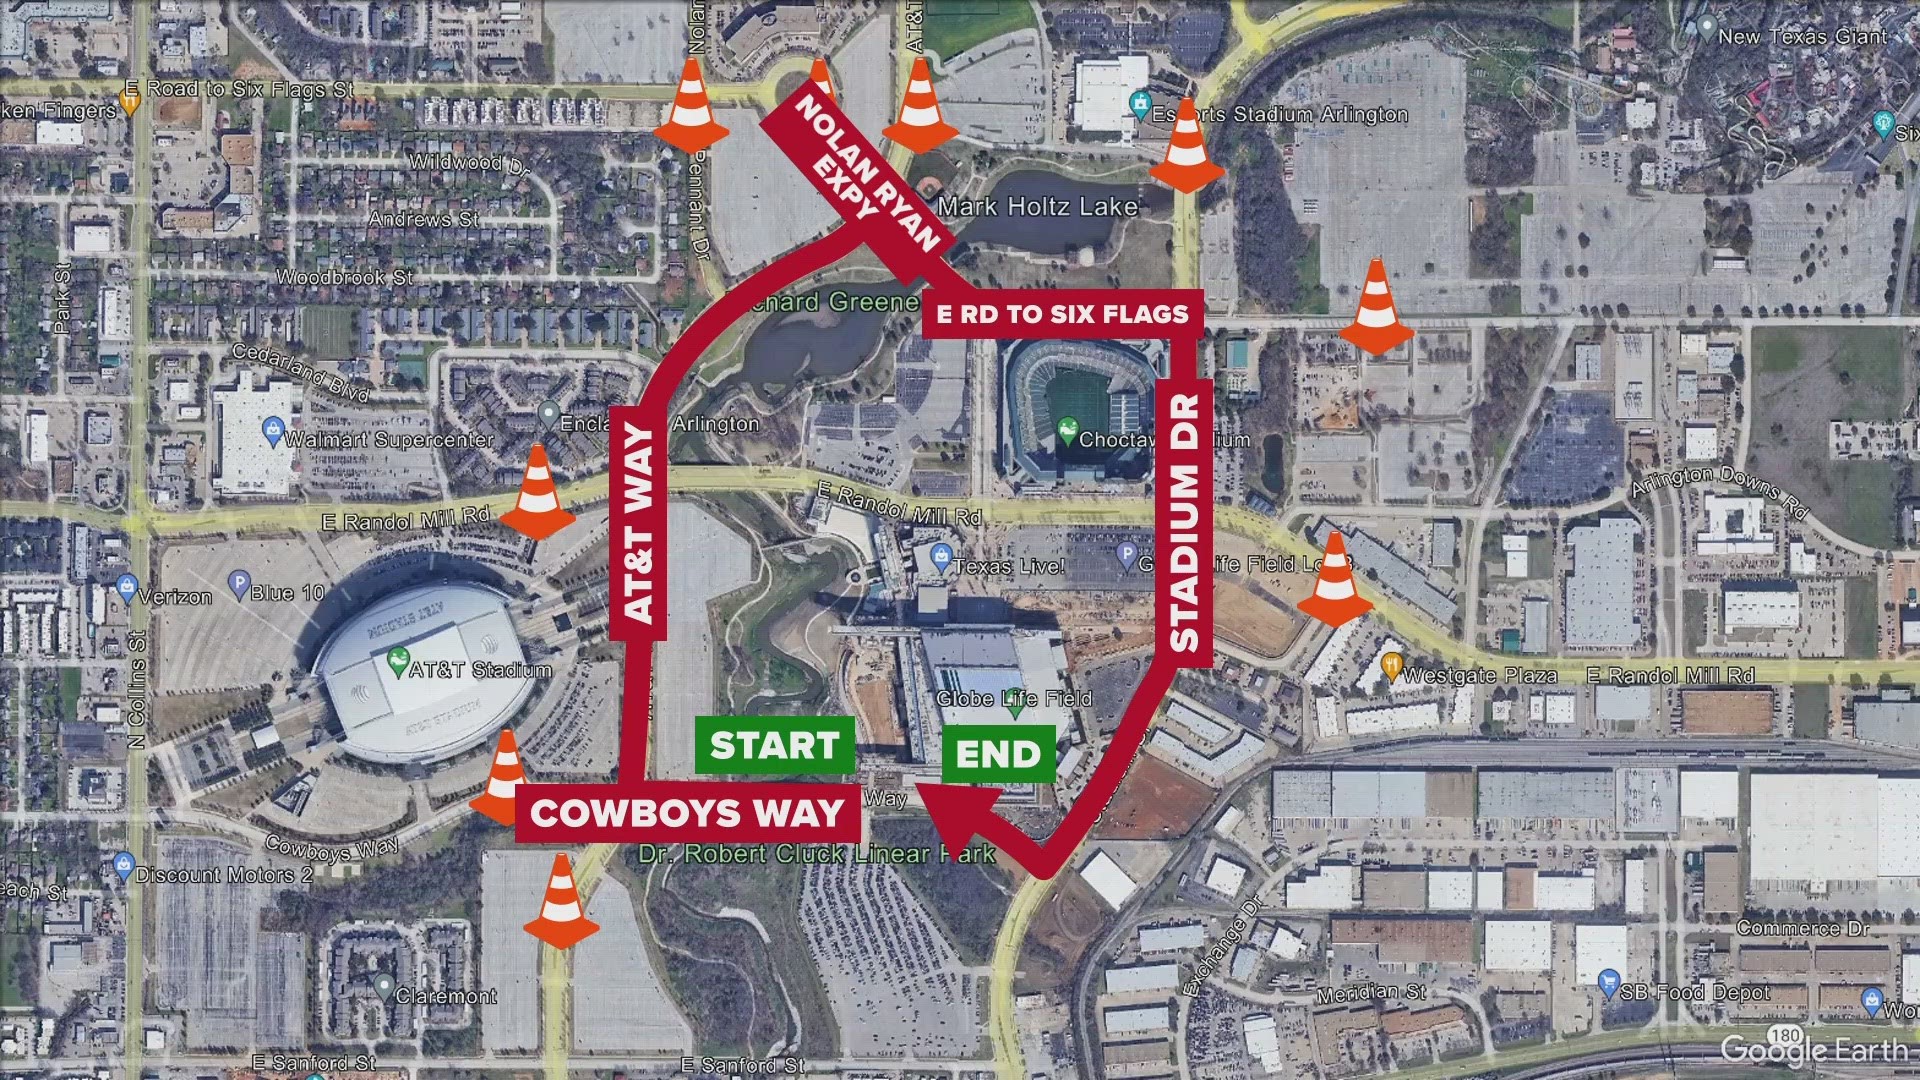 Here's a look at the parade route! It's free and open to the public, so arrive early.